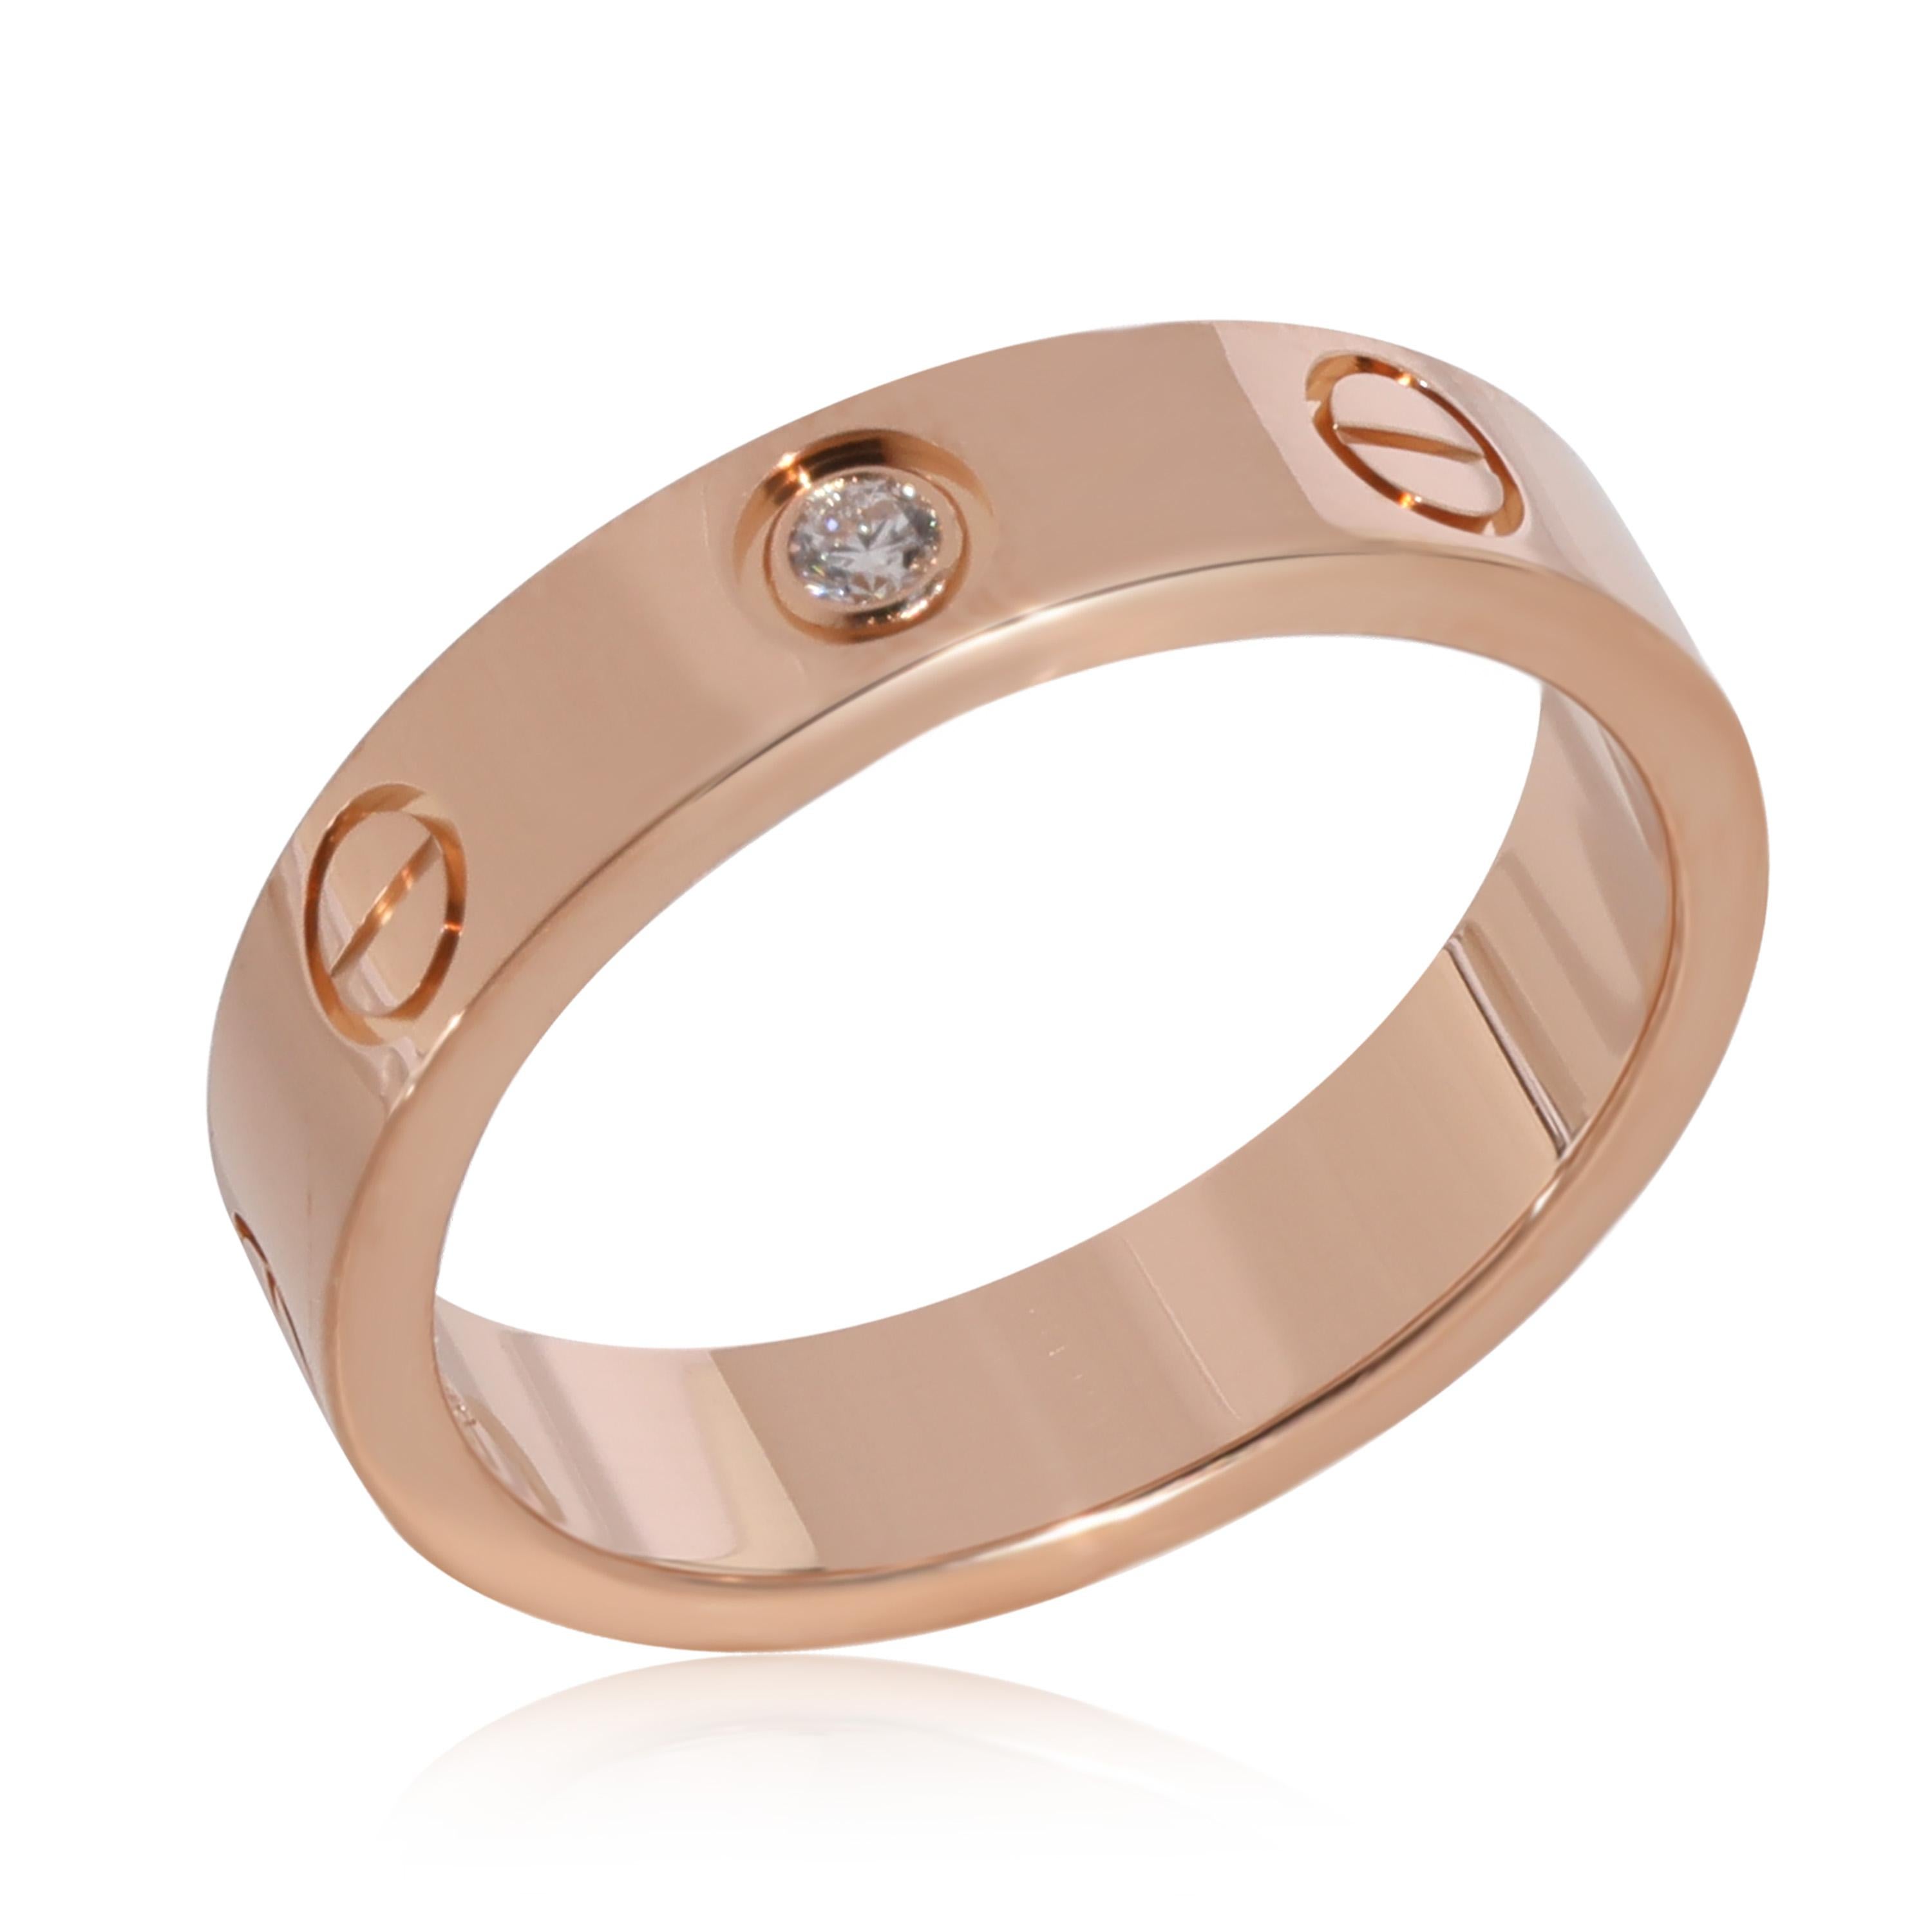 Cartier Love Diamond Wedding Band in 18k Rose Gold 0.02 CTW

PRIMARY DETAILS
SKU: 125401
Listing Title: Cartier Love Diamond Wedding Band in 18k Rose Gold 0.02 CTW
Condition Description: Retails for 2220 USD. In excellent condition and recently